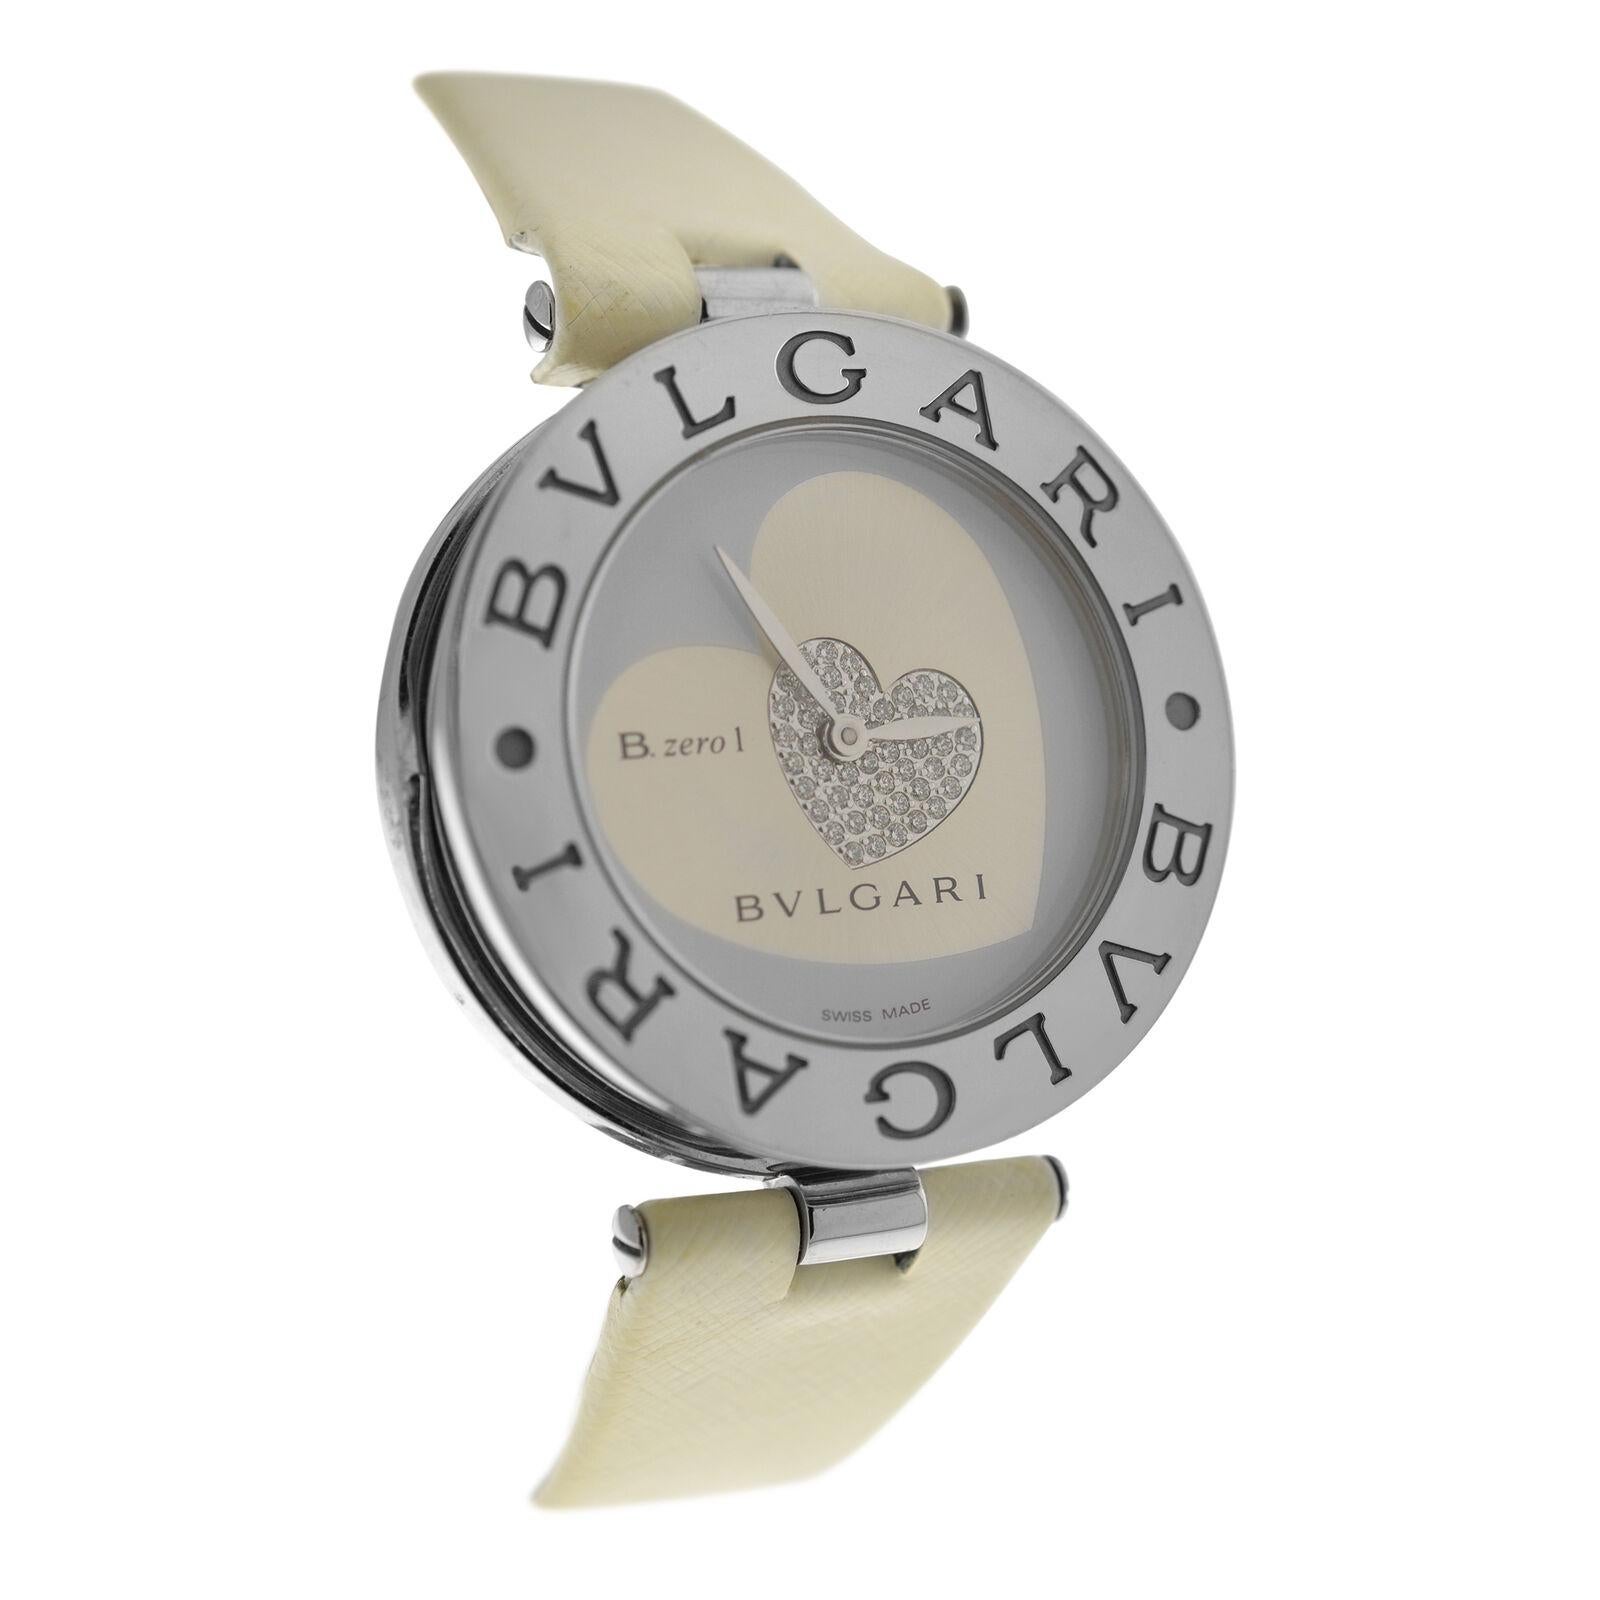 
Brand	Bvlgari Bulgari
Model	B. Zero 1 Double Heart BZ35S
Gender	Ladies
Condition	Pre-owned
Movement	Swiss quartz
Case Material	Stainless Steel
Bracelet / Strap Material	
Leather

Clasp / Buckle Material	
Stainless Steel	
Clasp Type	Butterfly